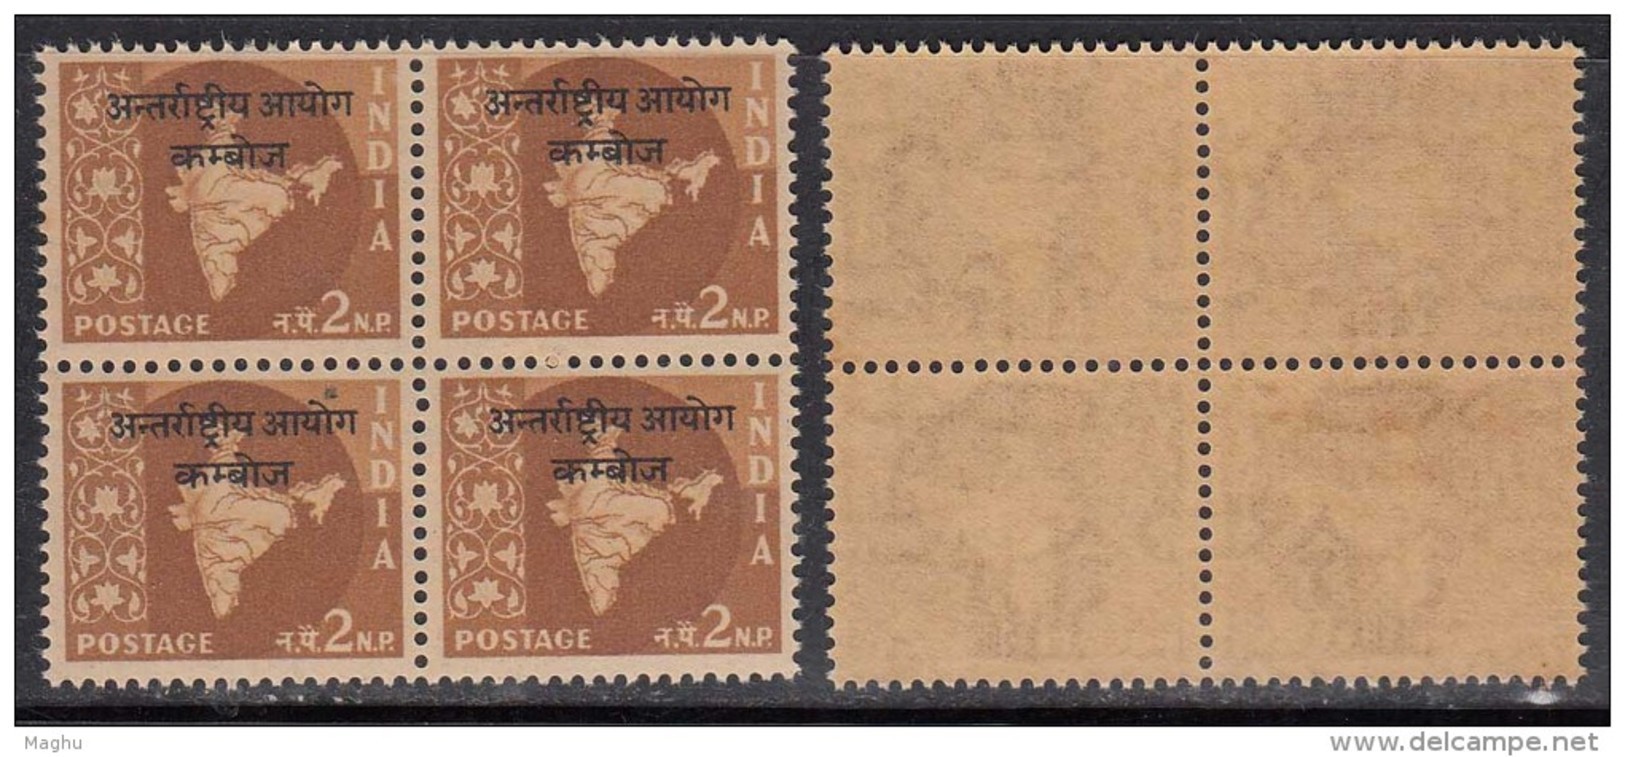 India MNH 1962, Ovpt. Cambodia On 2np Map Series, Ashokan Watermark, Block Of 4, - Franchise Militaire